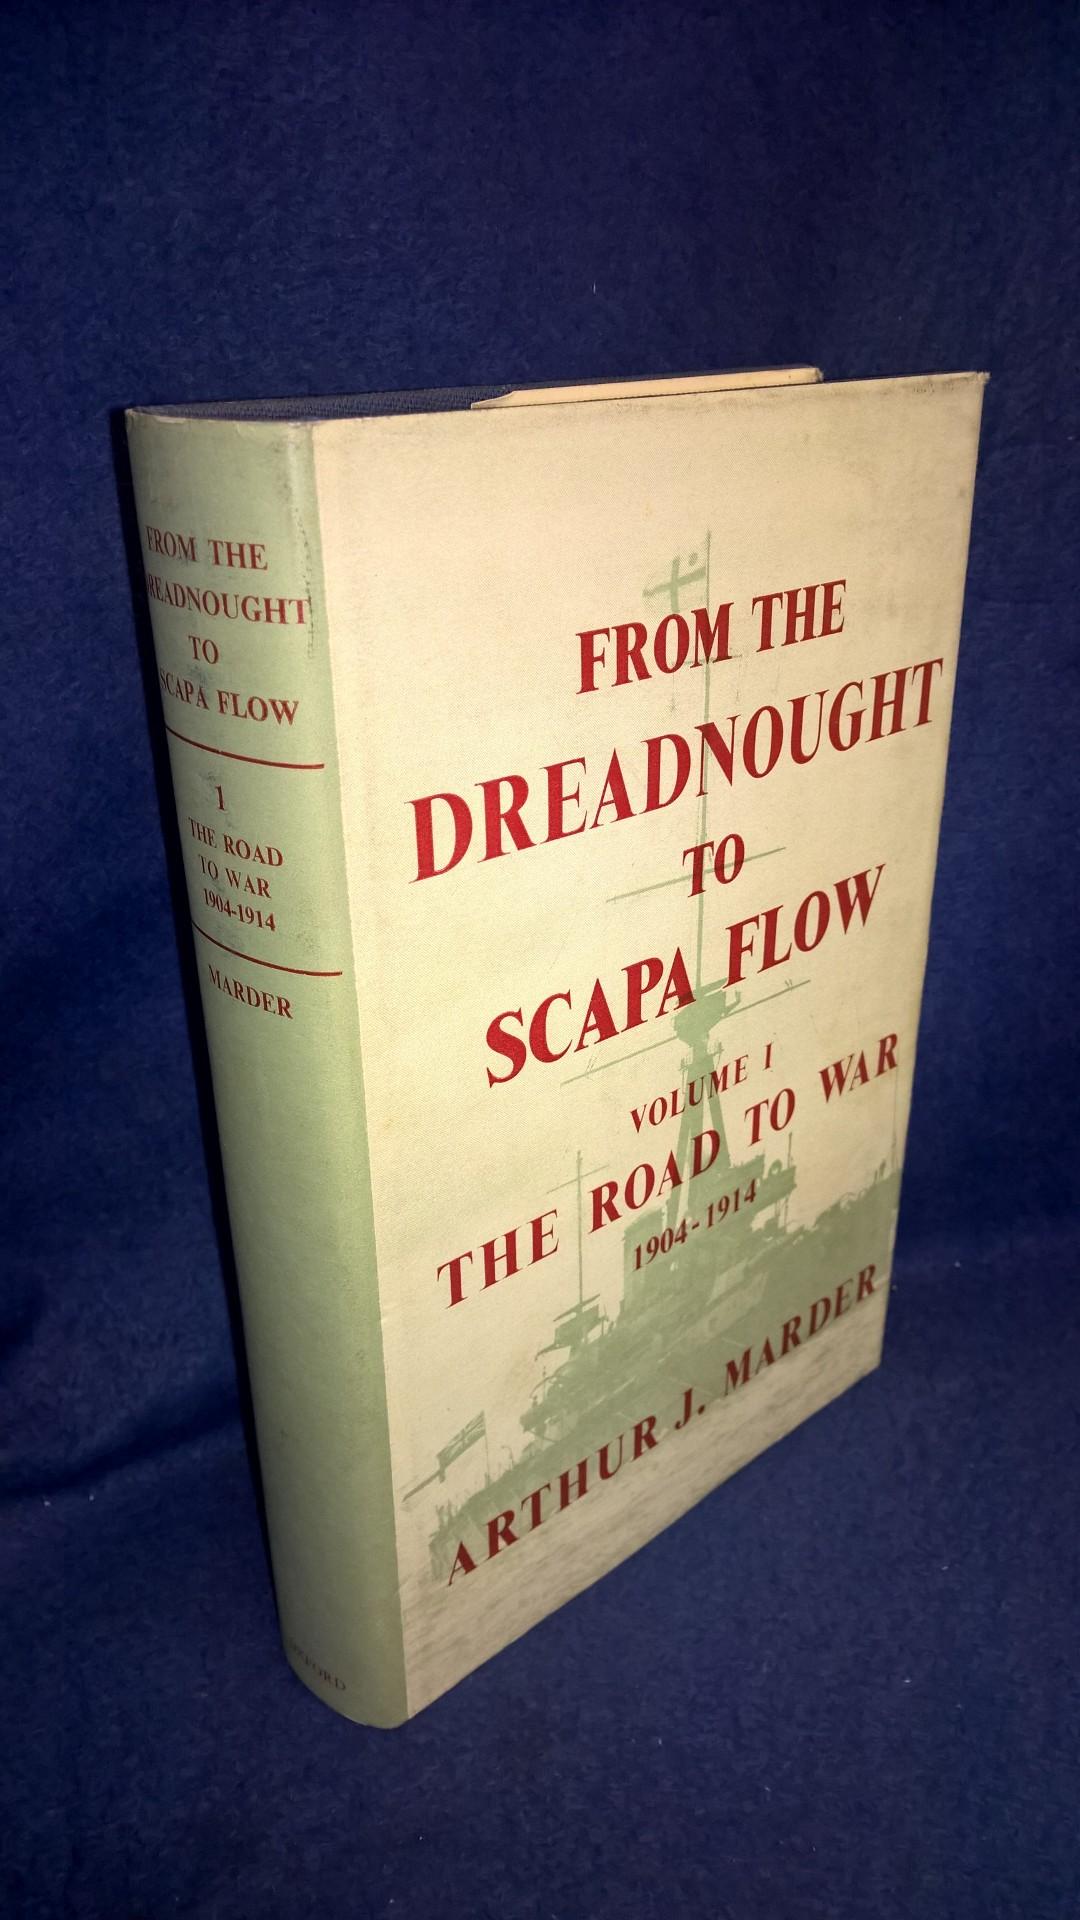 From the Dreadnought to Scapa Flow Vol. I The Road to War 1904-1914.